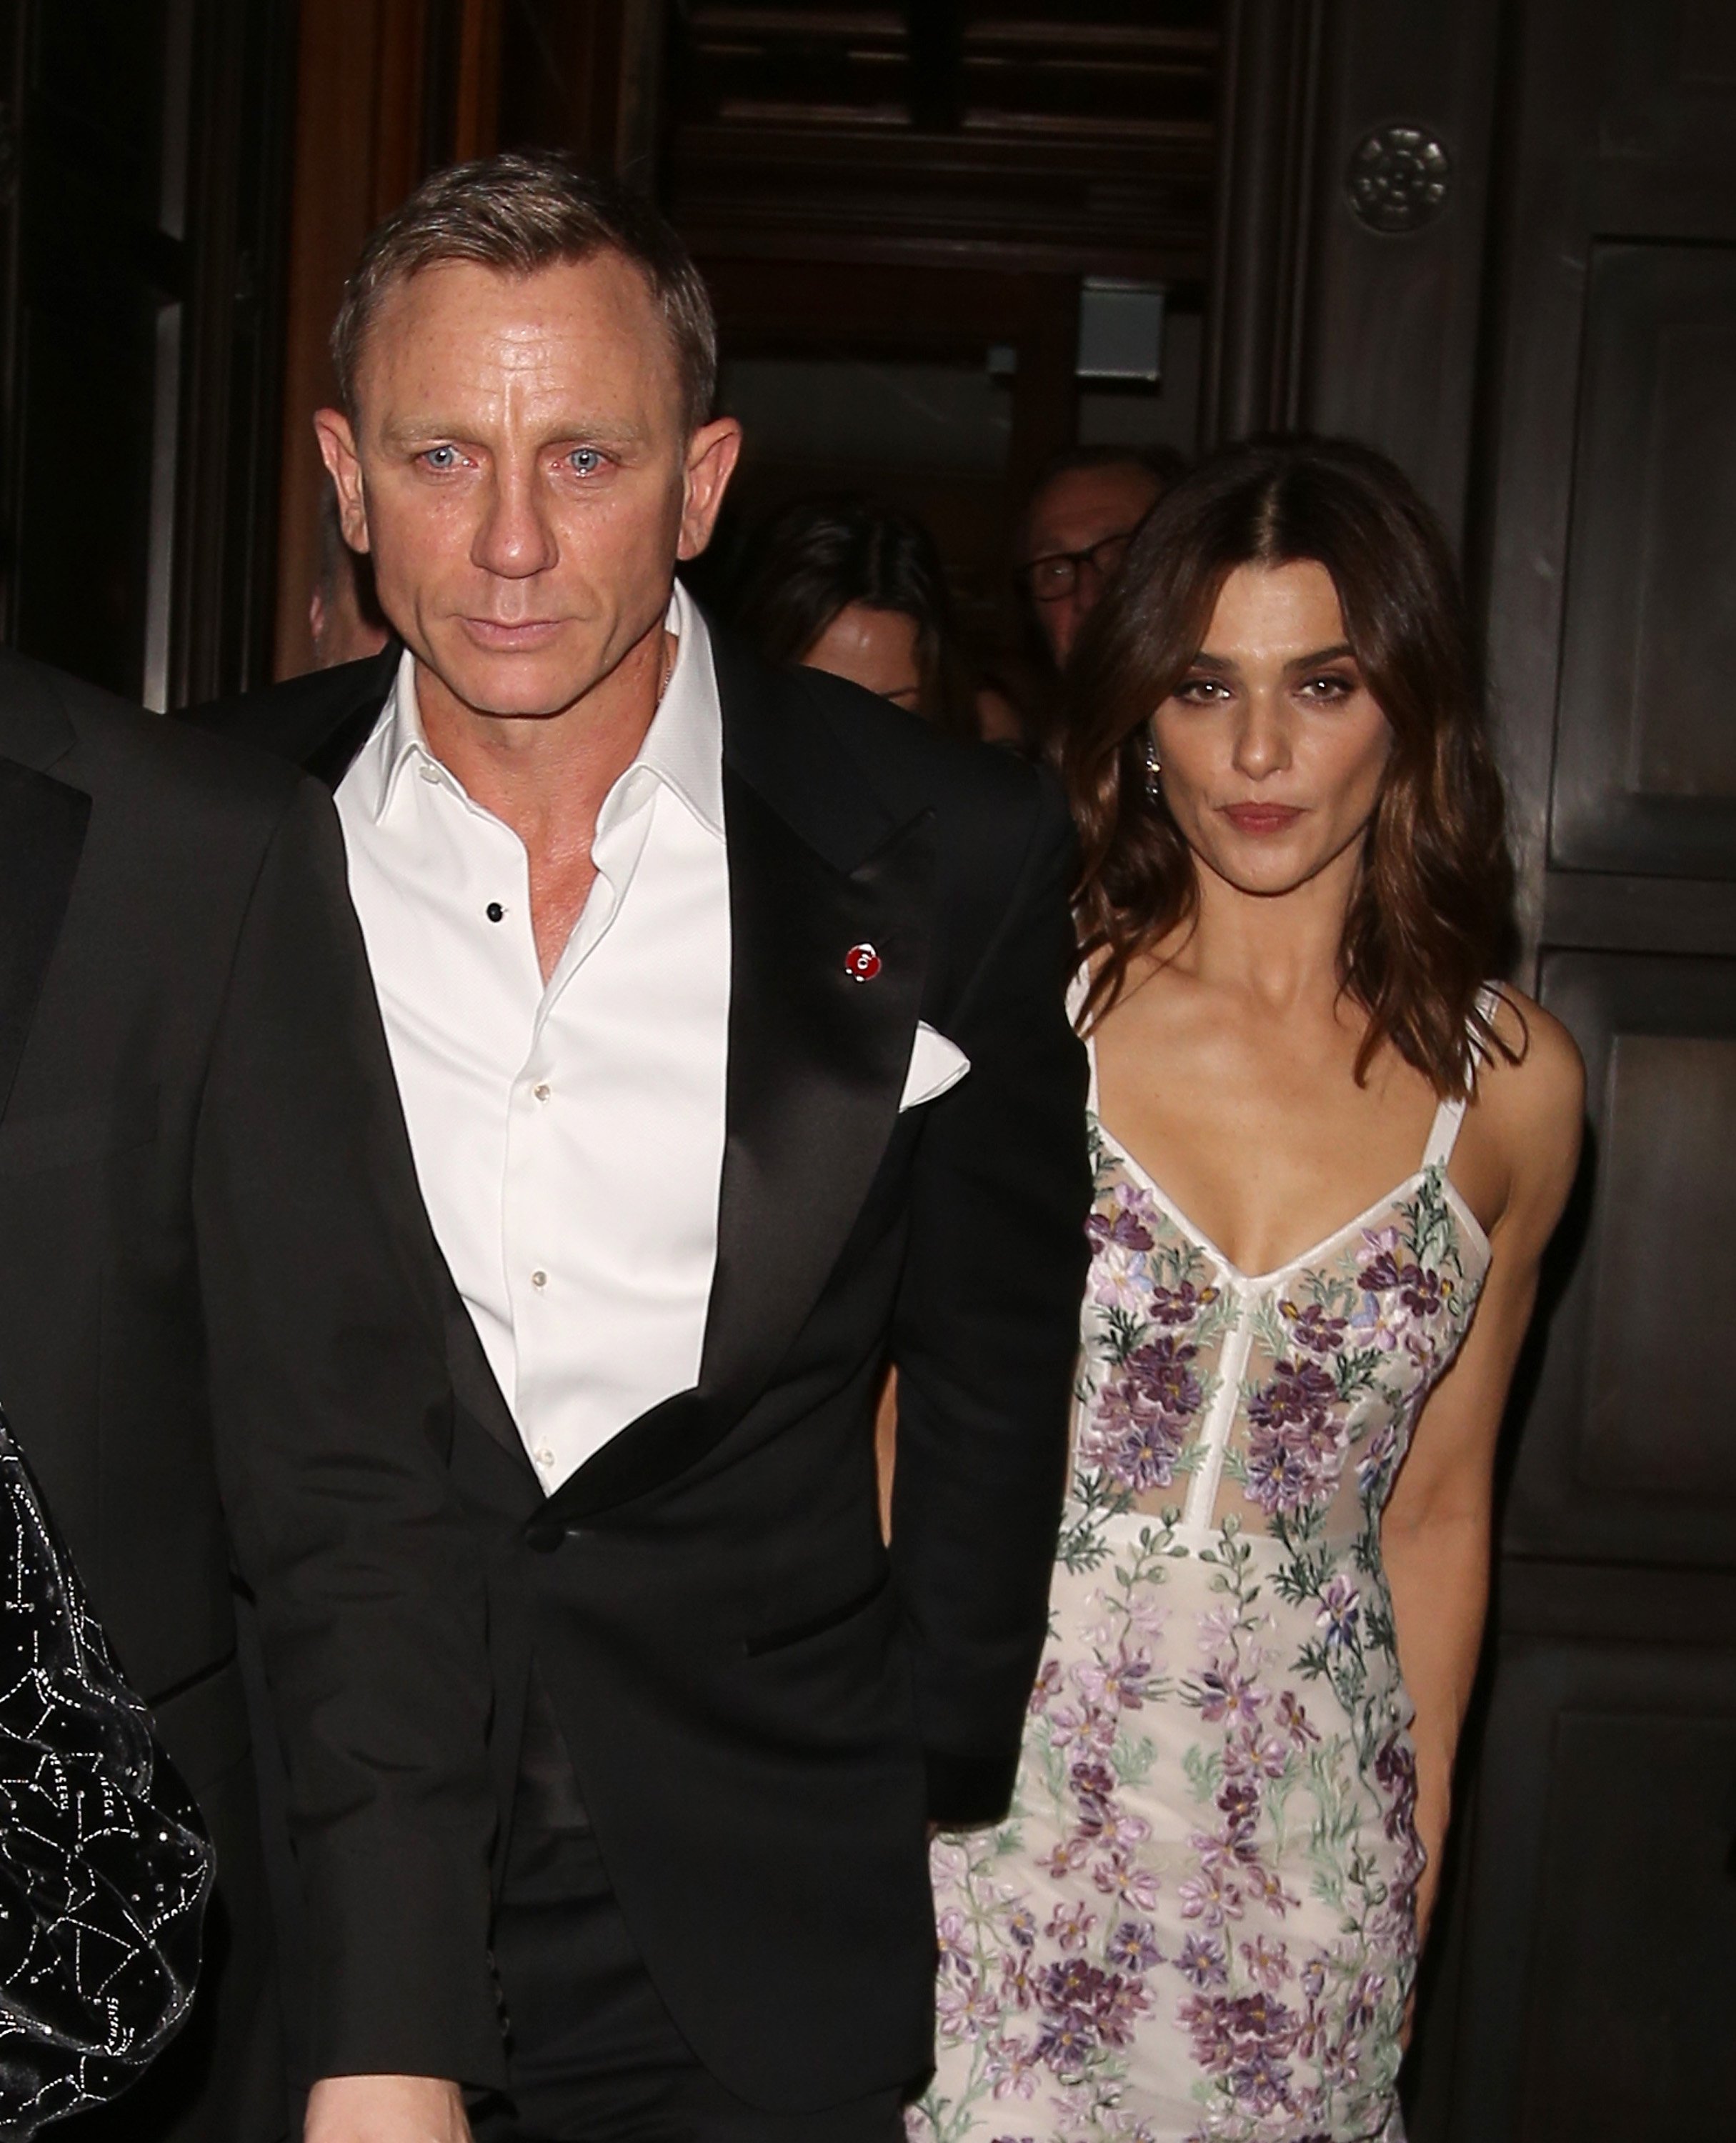 Daniel Craig and Rachel Weisz attend the Spectre Premiere after party at the British Museum on October 26, 2015, in London, England. | Source: Getty Images